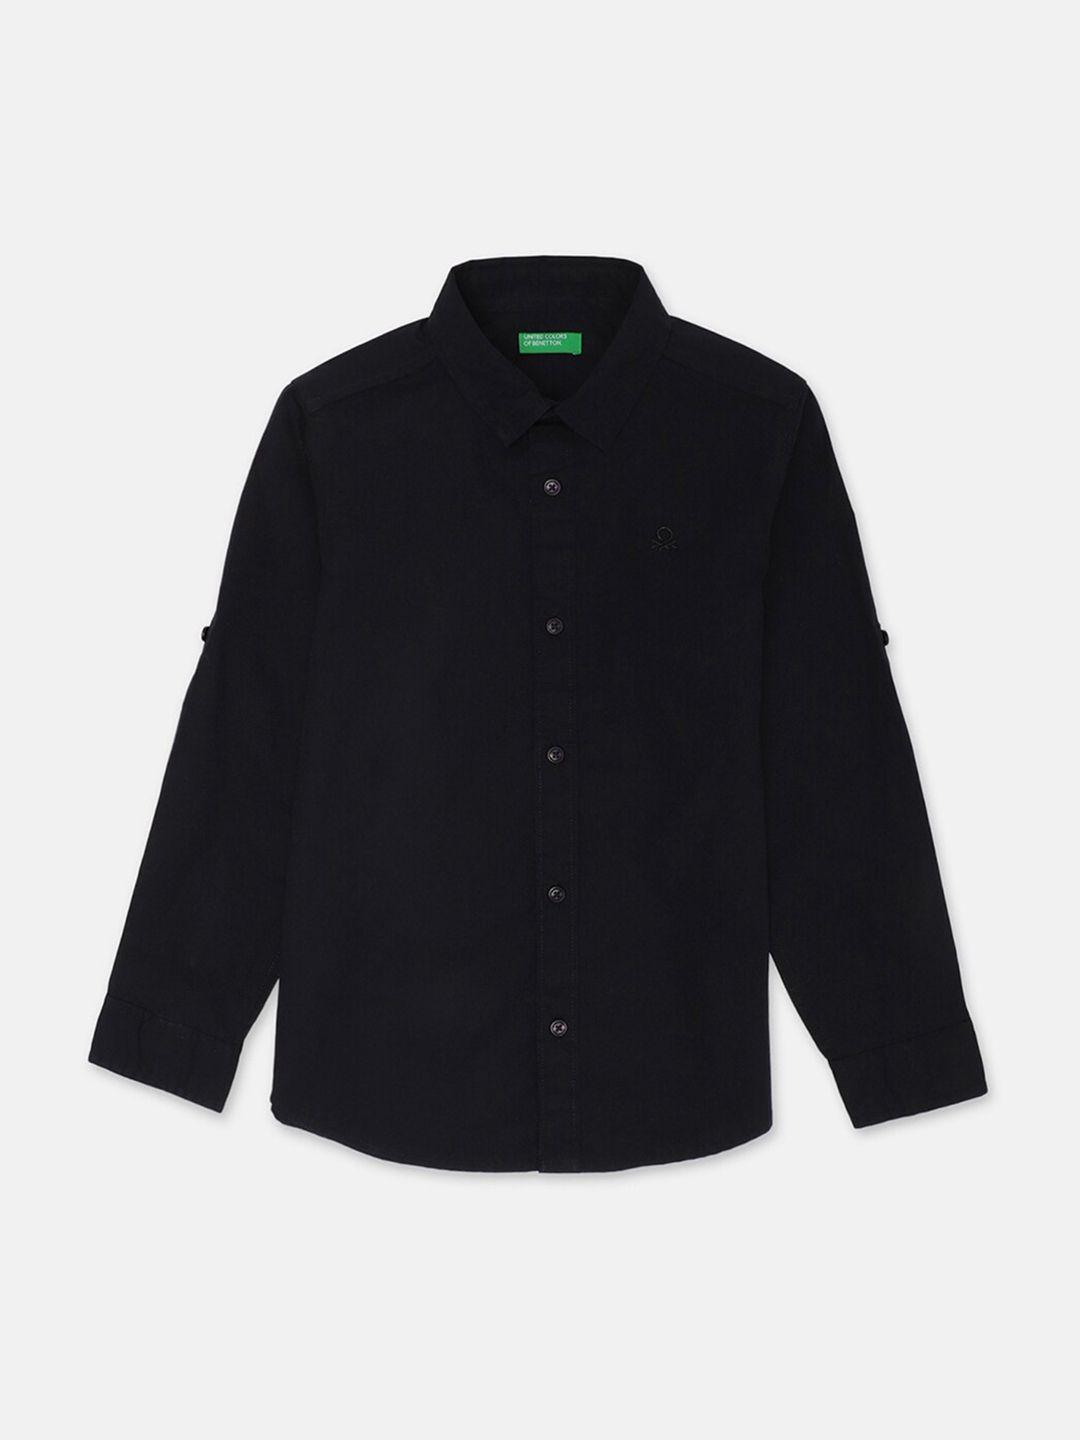 united-colors-of-benetton-boys-black-solid-casual-shirt